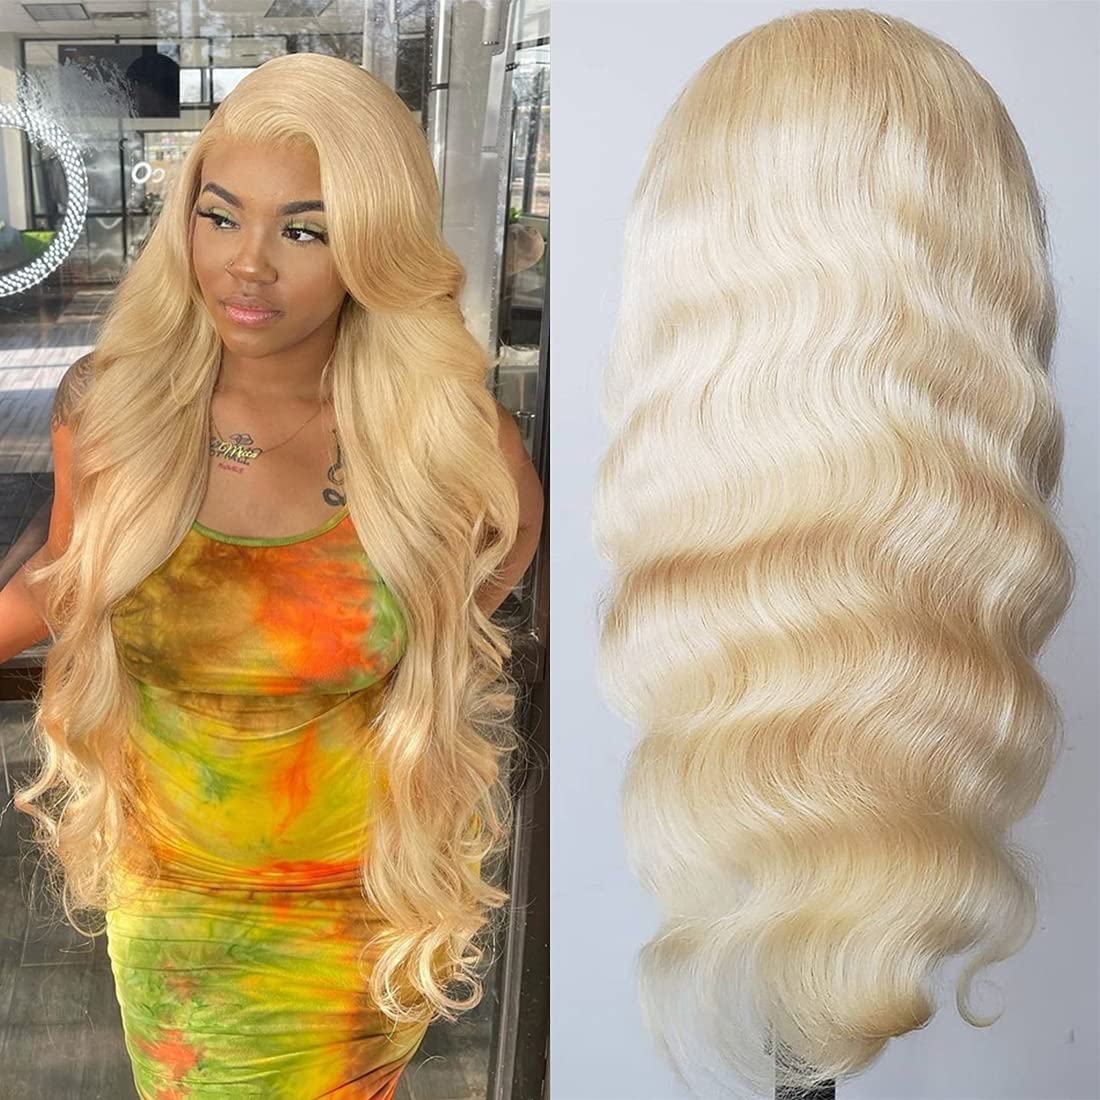 LUMIERE Hair Blonde Lace Front Wigs Human Hair - 613 Closure Wig Human Hair  4x4 HD Lace